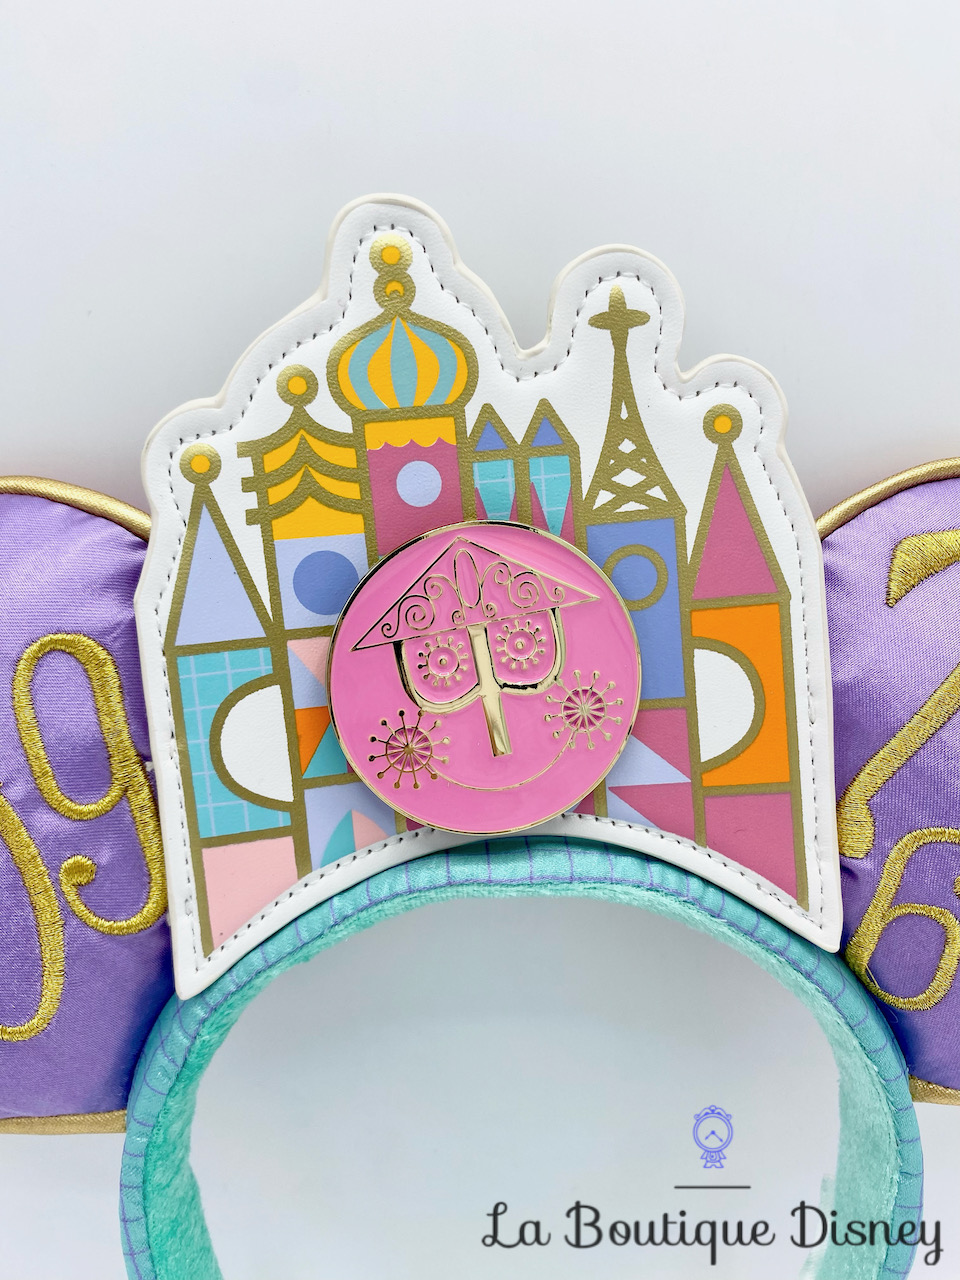 oreilles-ears-mickey-mouse-its-a-small-world-the-main-attraction-disney-store-édition-limitée-serre-tete-3